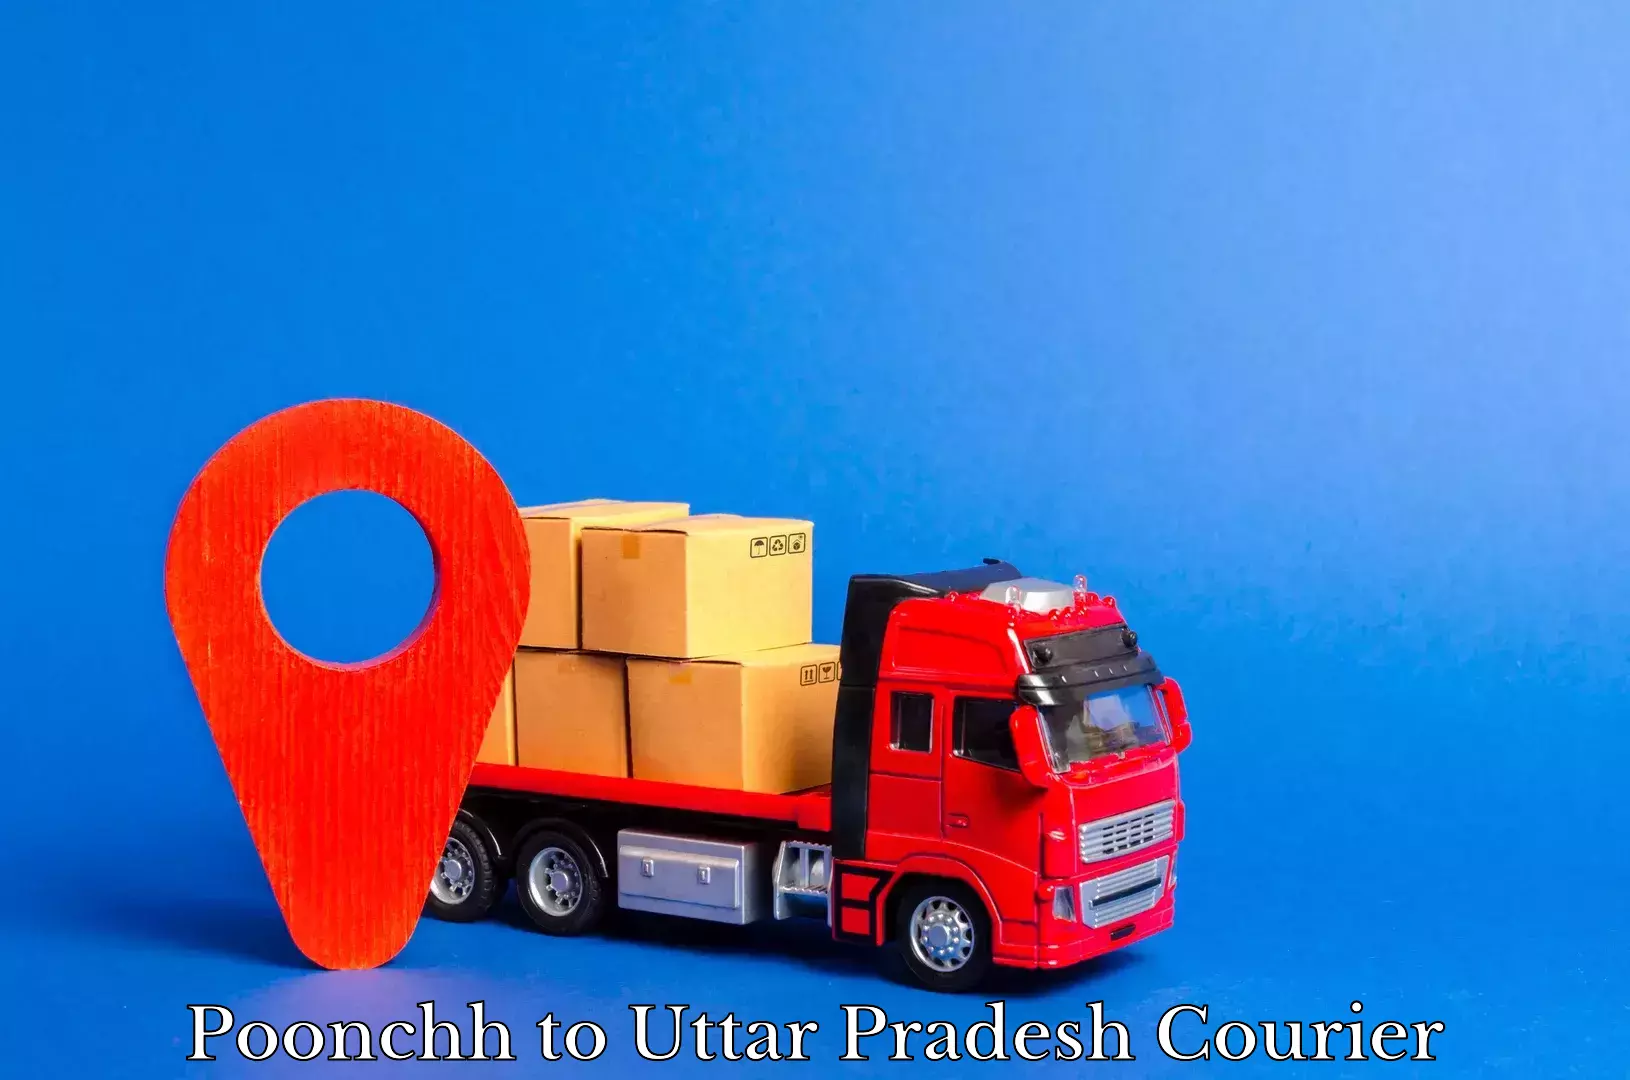 Nationwide delivery network Poonchh to Uttar Pradesh